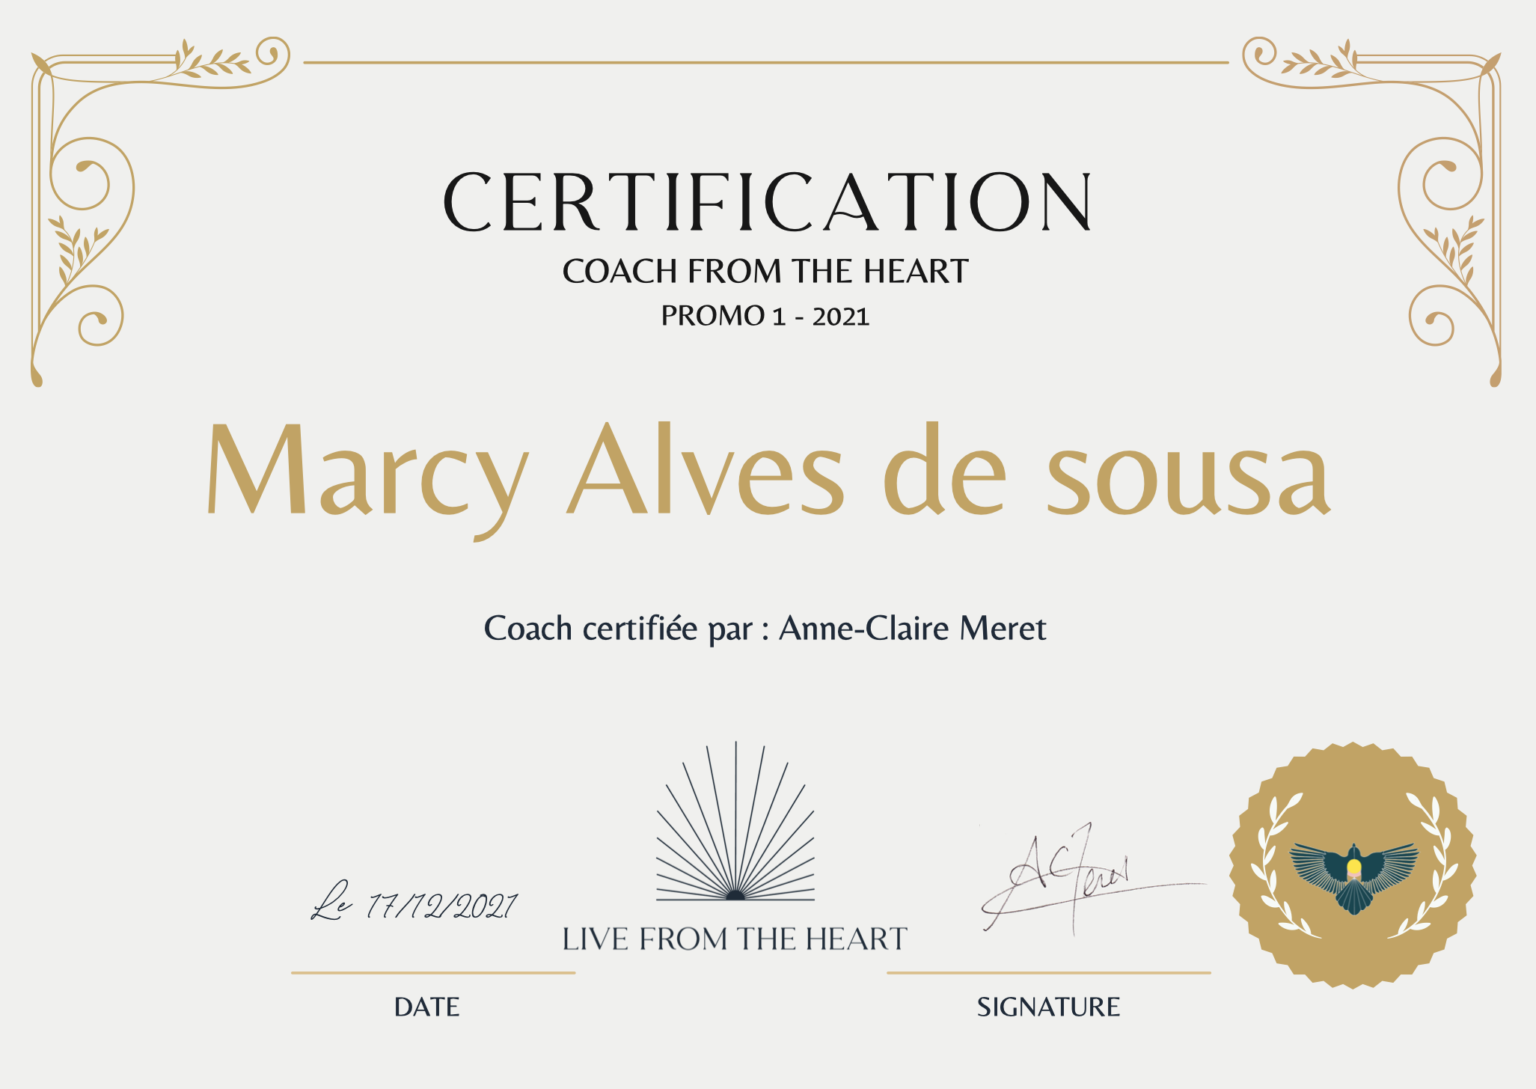 CERTIFICATION COACH FROM THE HEART par Anne-Claire Meret